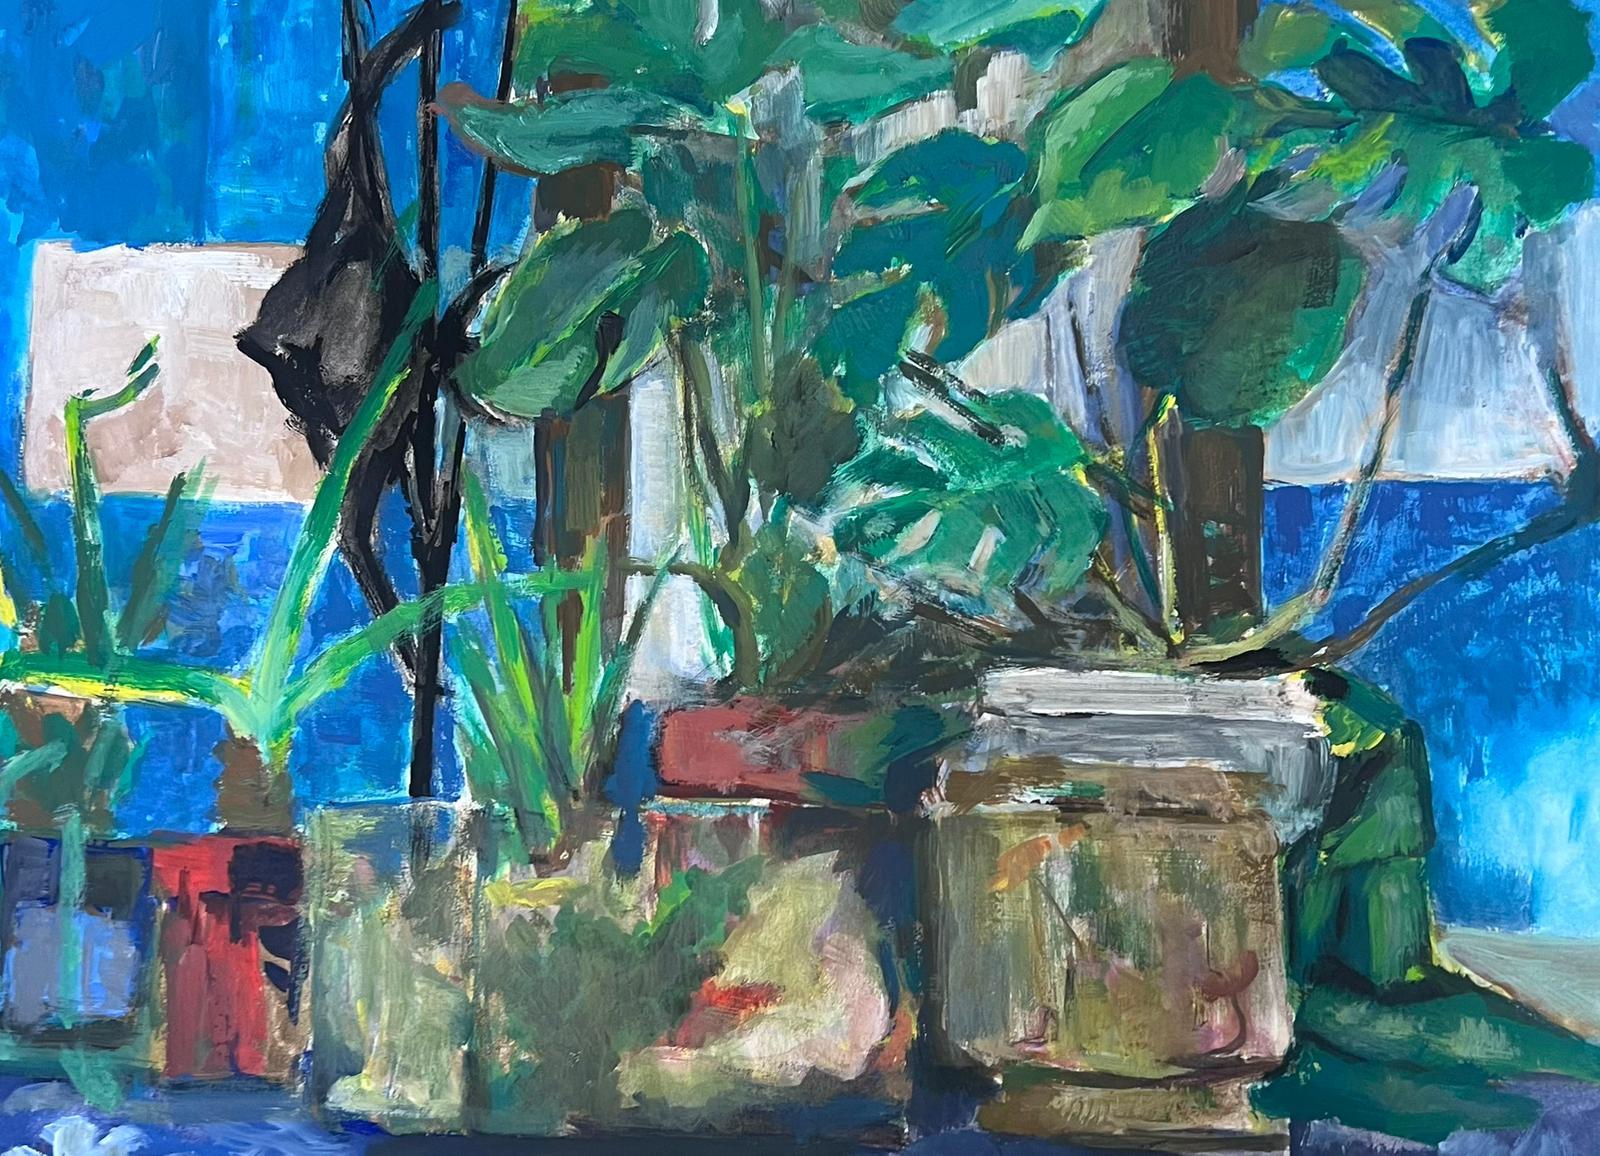 Plant Still Life
by Guy Nicod
(French 1923 - 2021)
oil on artist paper, unframed
painting : 18 x 24 inches
provenance: artists estate, France
condition: very good and sound condition